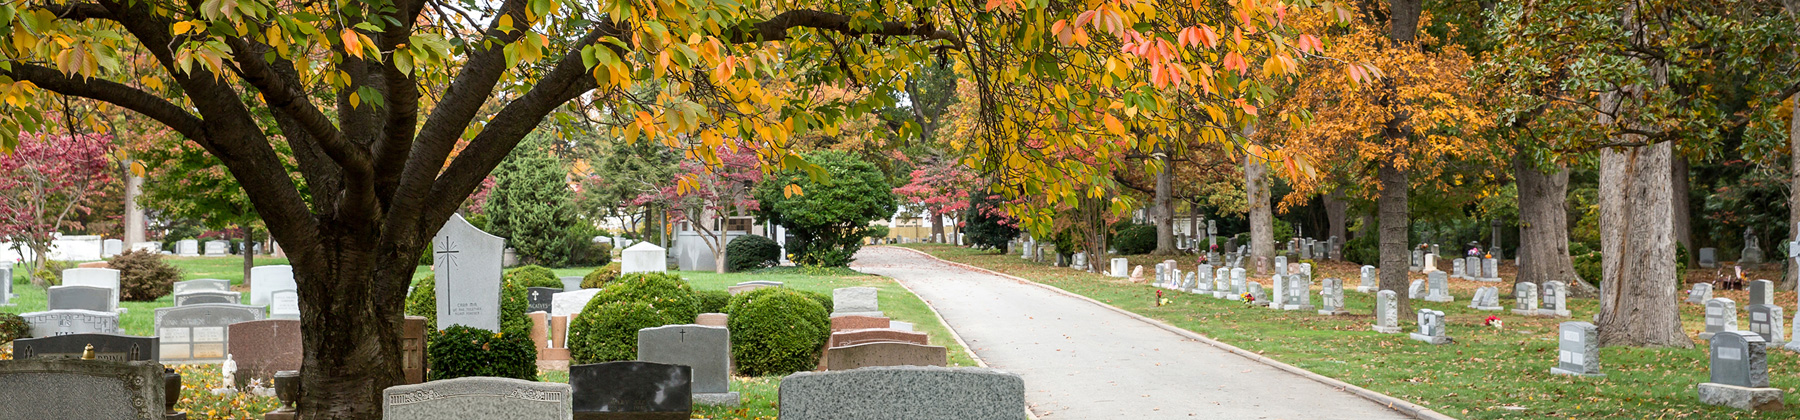 Columbia Gardens Cemetery Welcome